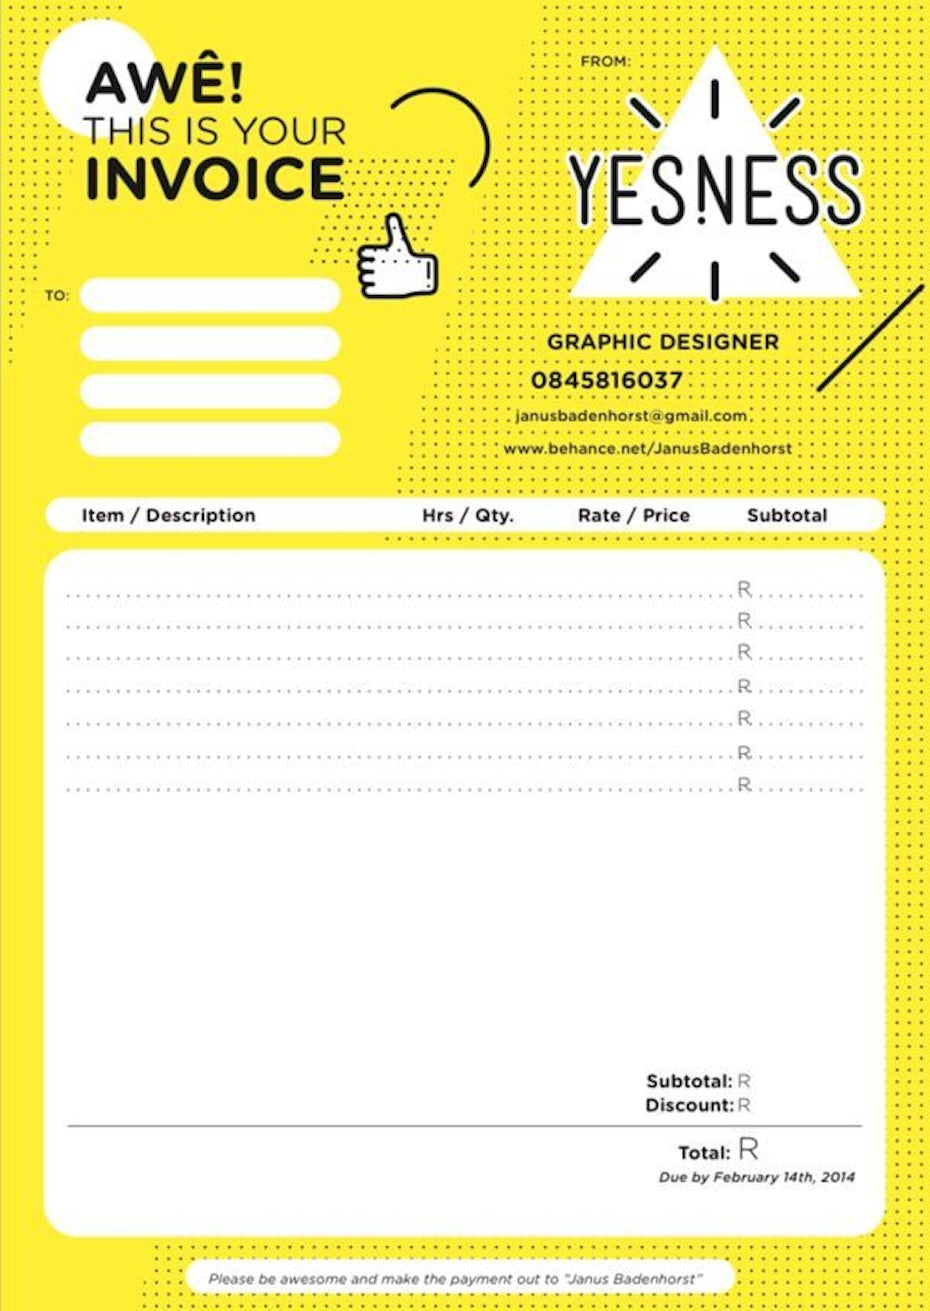 bold, busy yellow and white invoice design